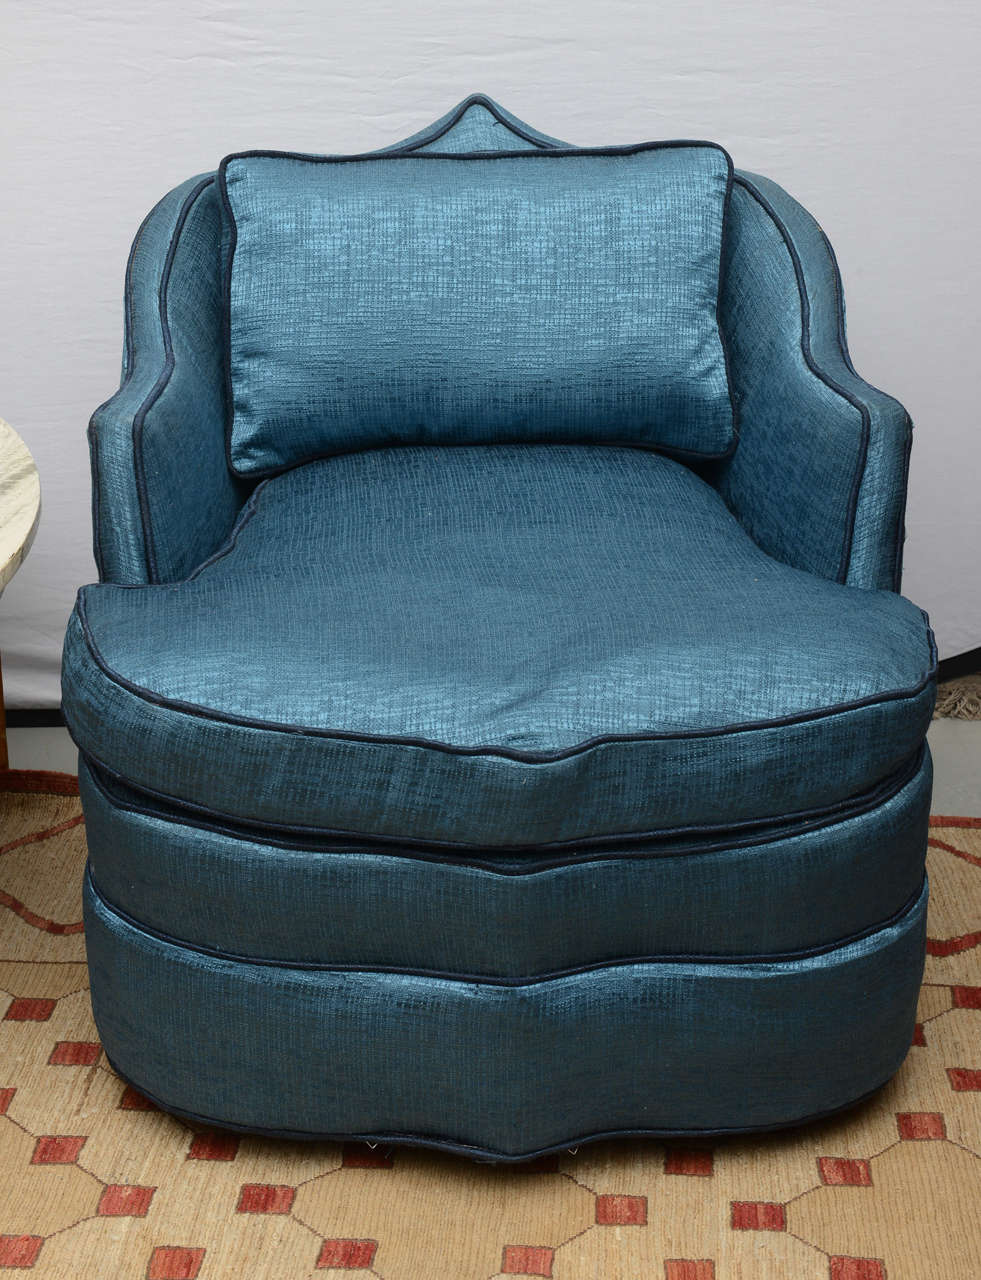 Beautiful sapphire blue Moroccan swivel chair with contrast darker piping.  Chair is on wheels and swivels.  1969